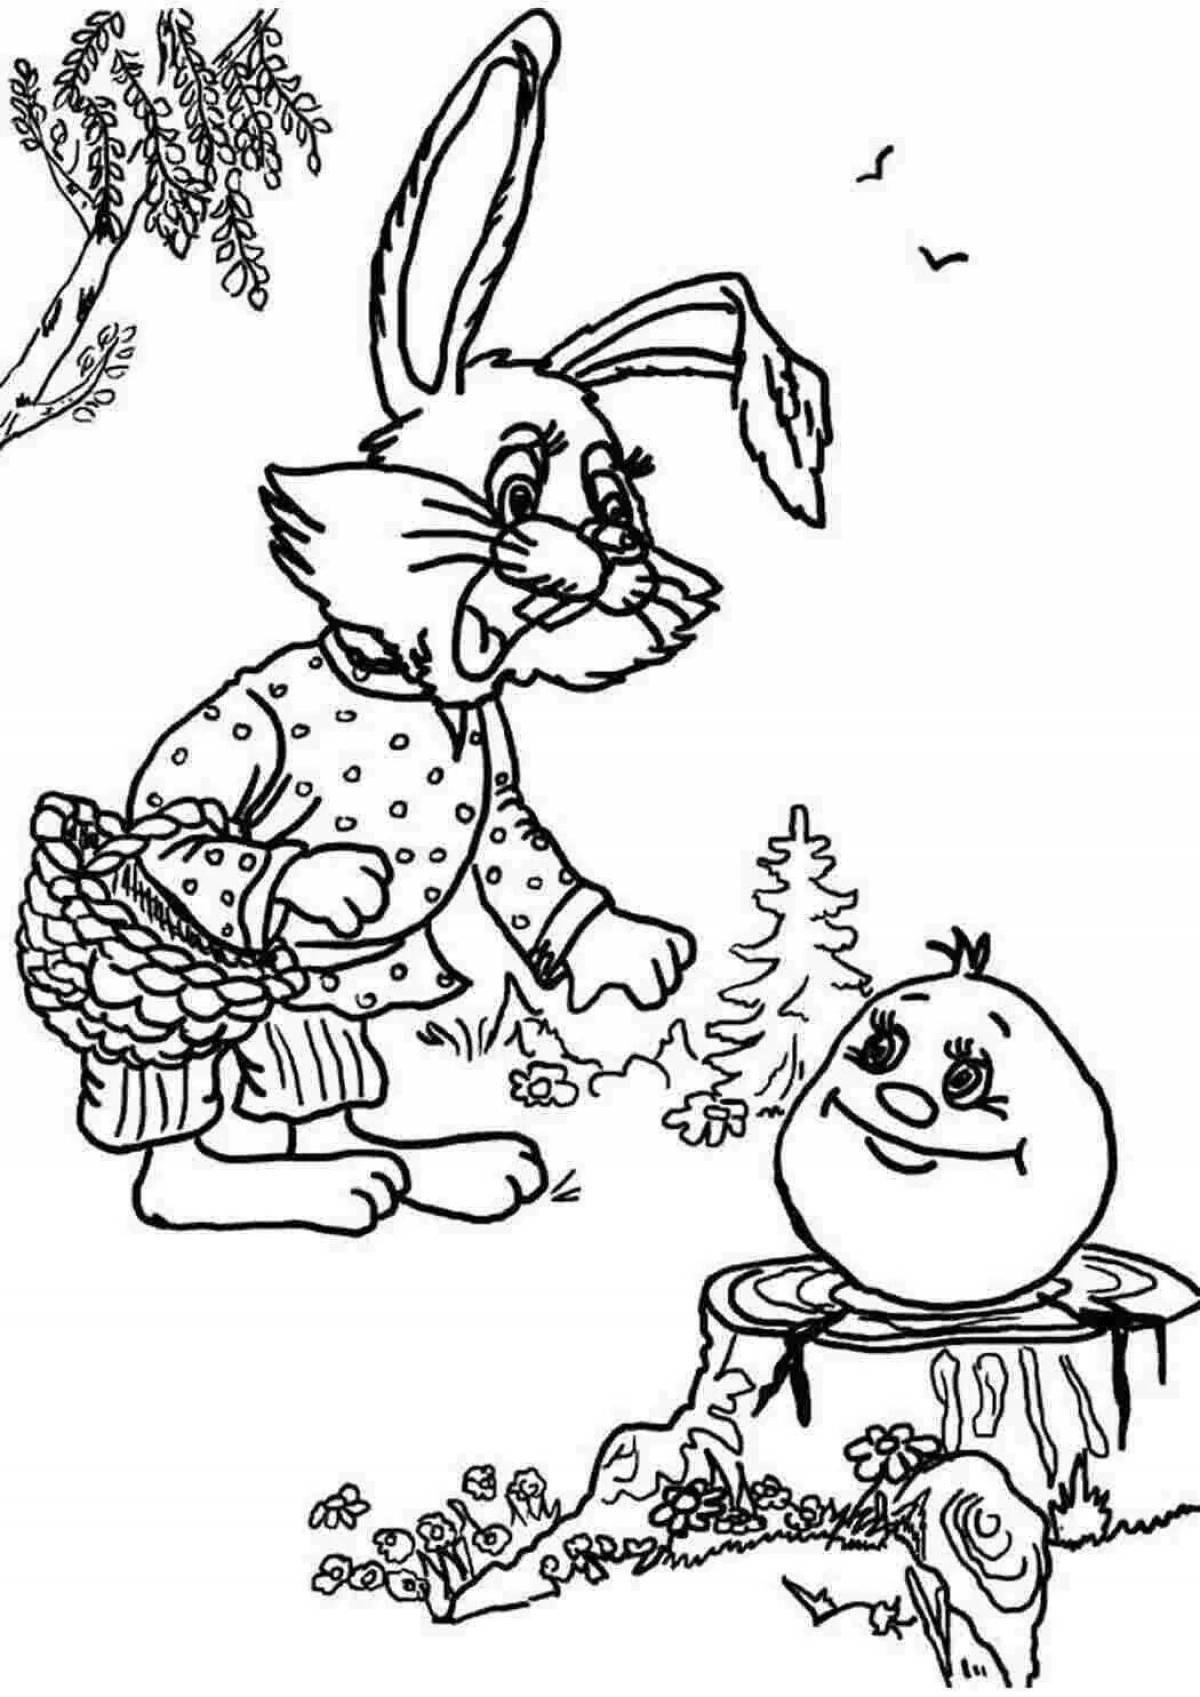 Cute gingerbread hare coloring book